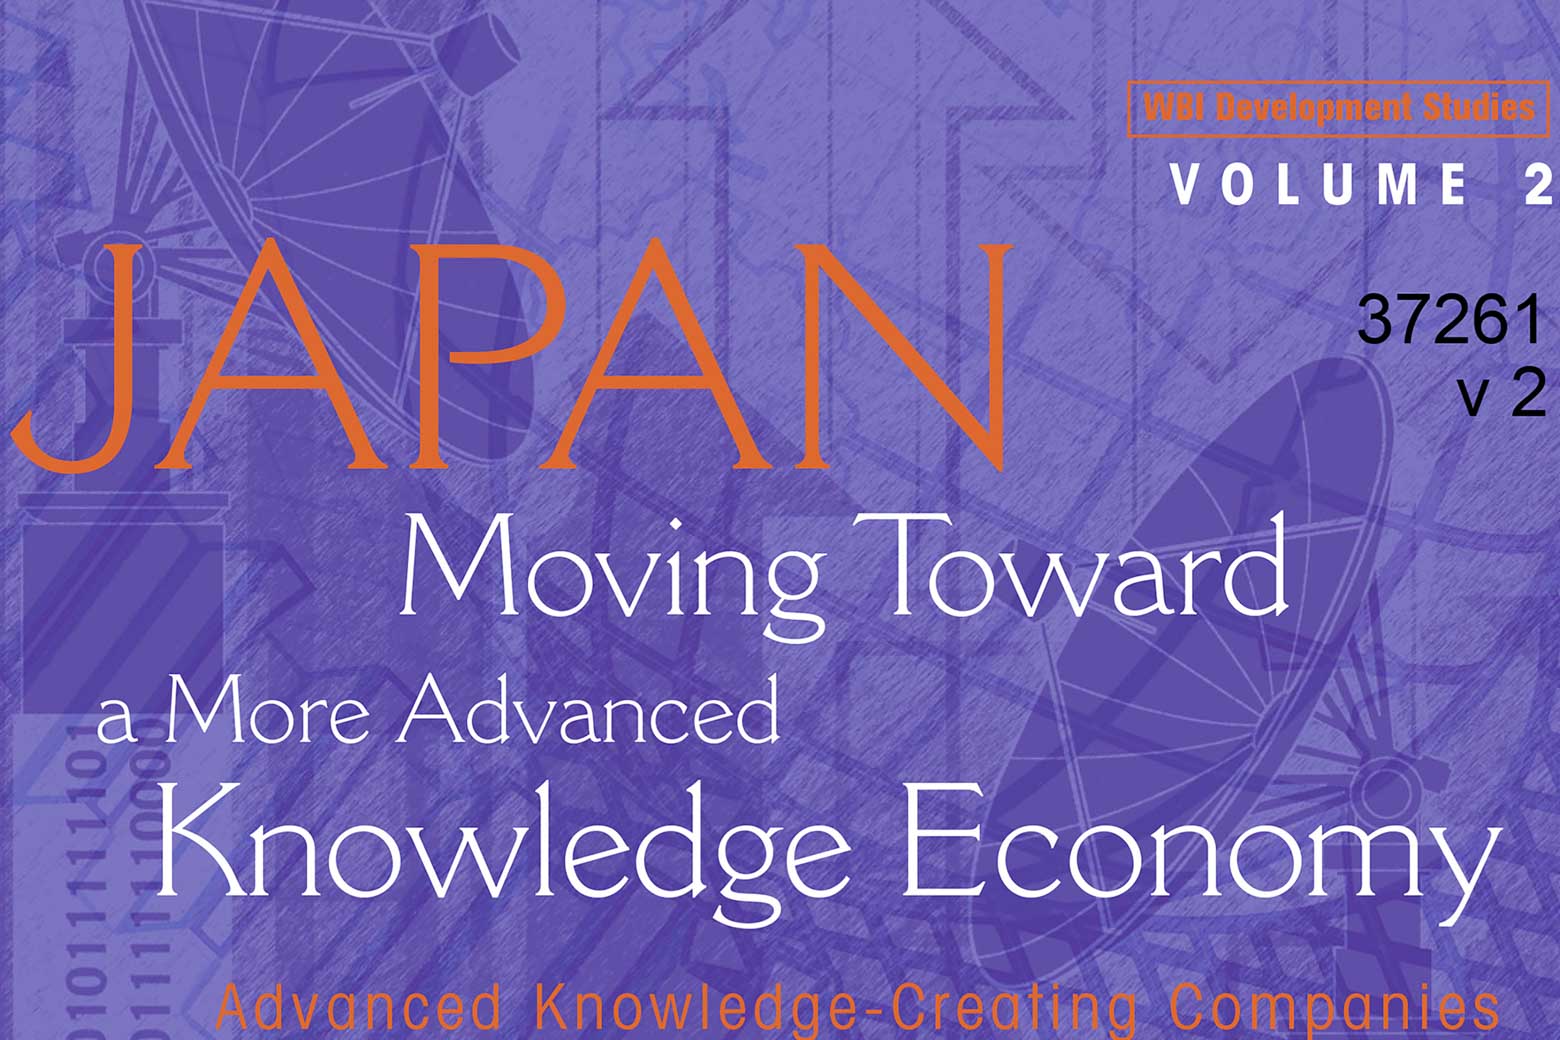 Japan - Moving Towards a More Advanced Knowledge Economy main image